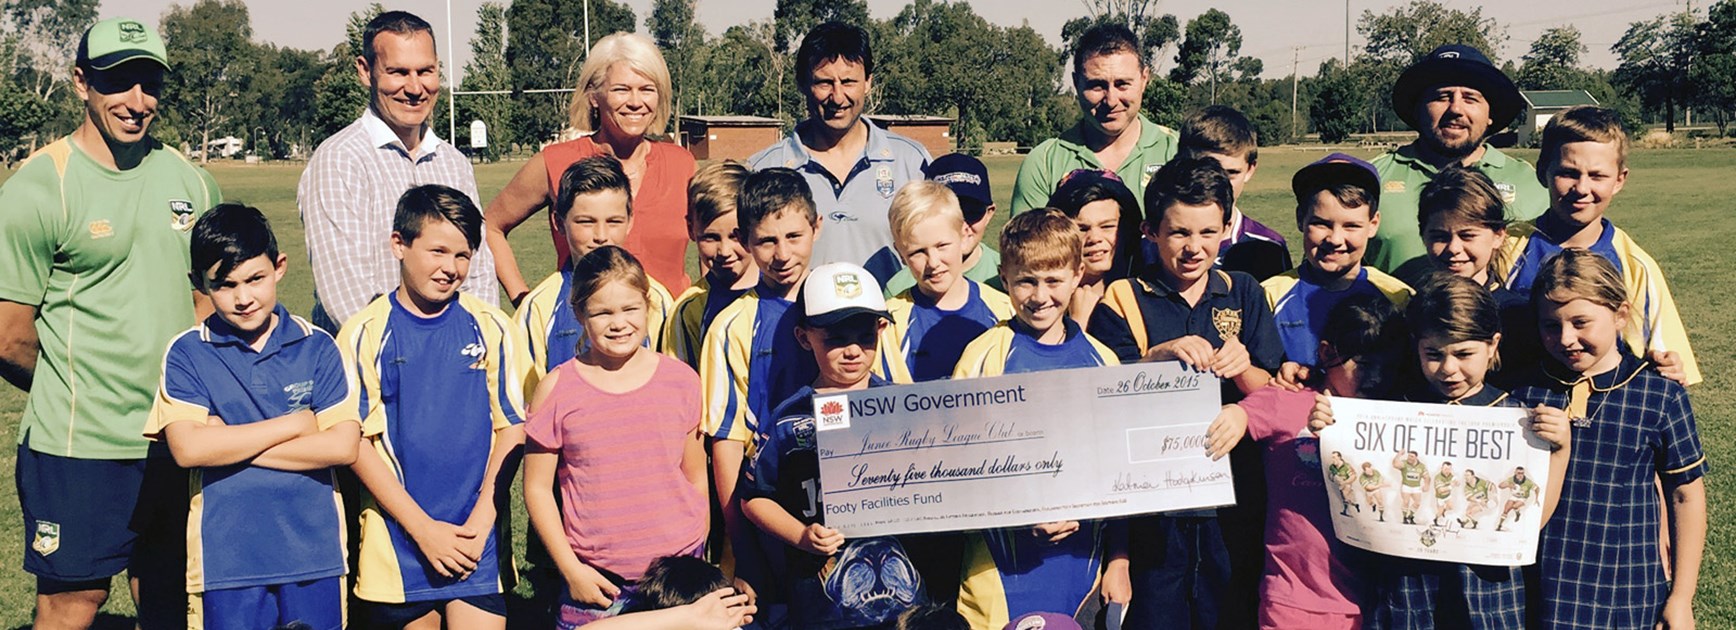 NSW Blues coach Laurie Daley returned to his home town of Junee, with $75,000 awarded towards upgrades for the local Laurie Daley Oval.